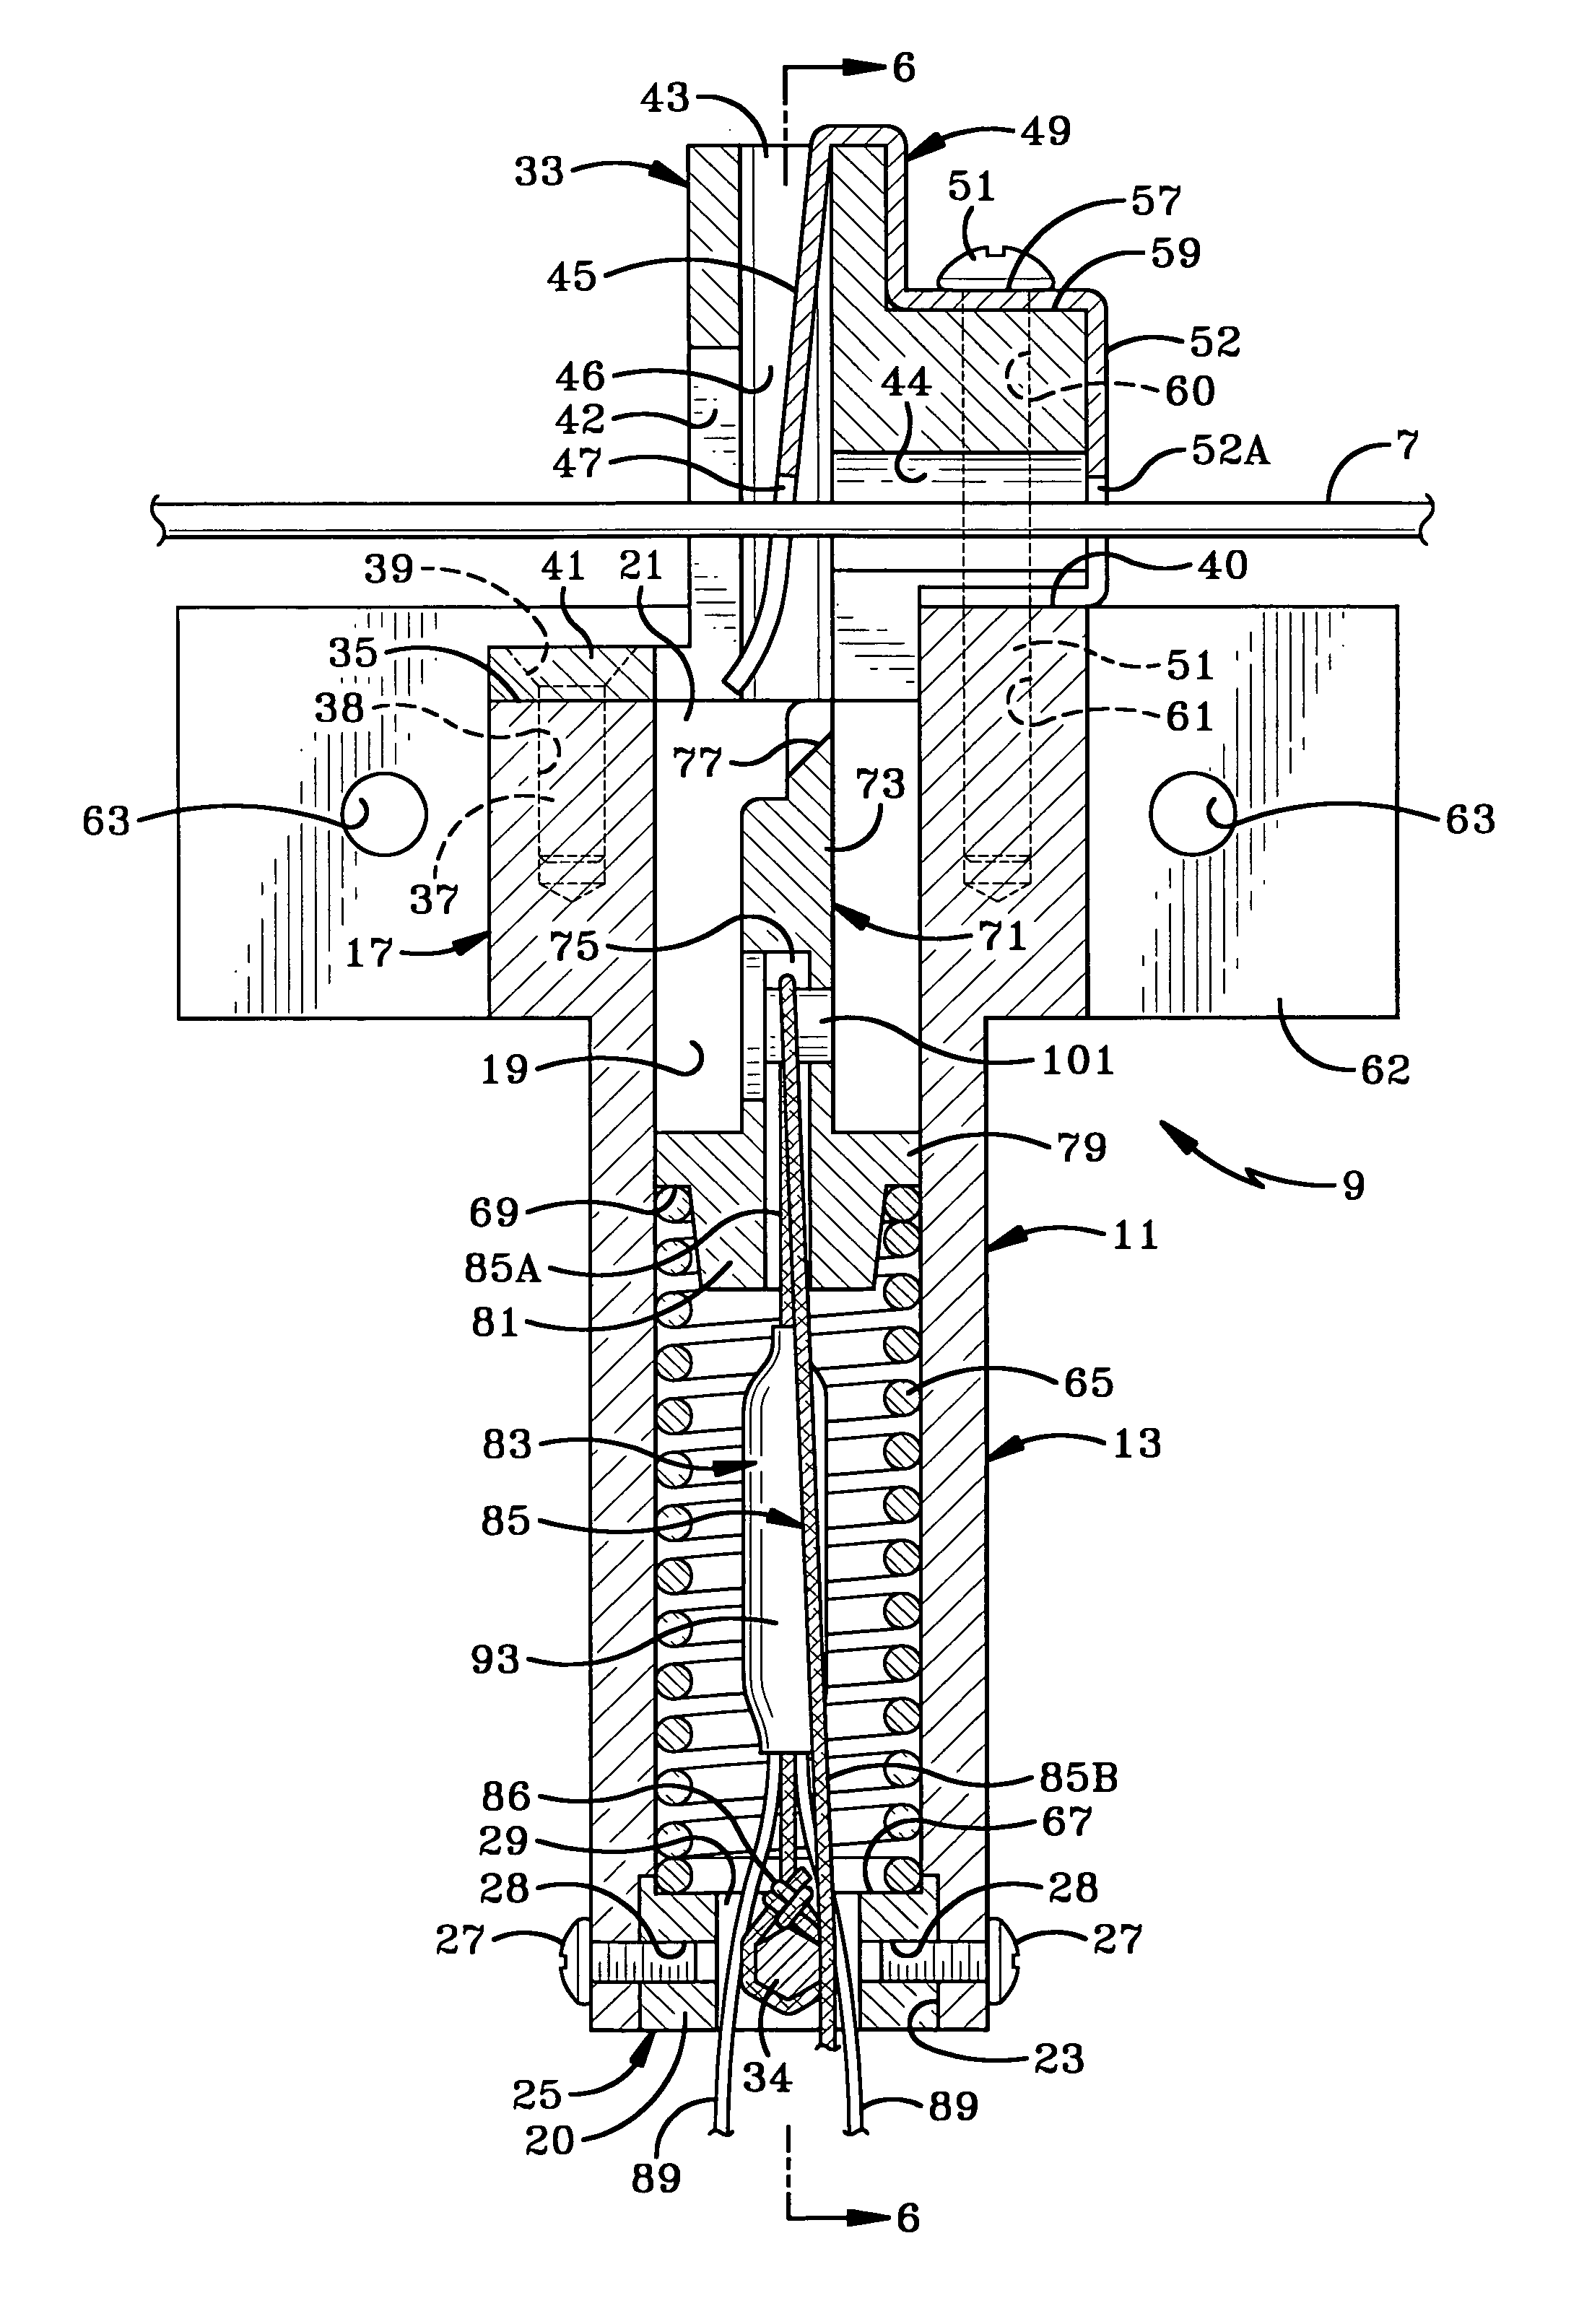 Method and apparatus for rapid severance of a decoy towline